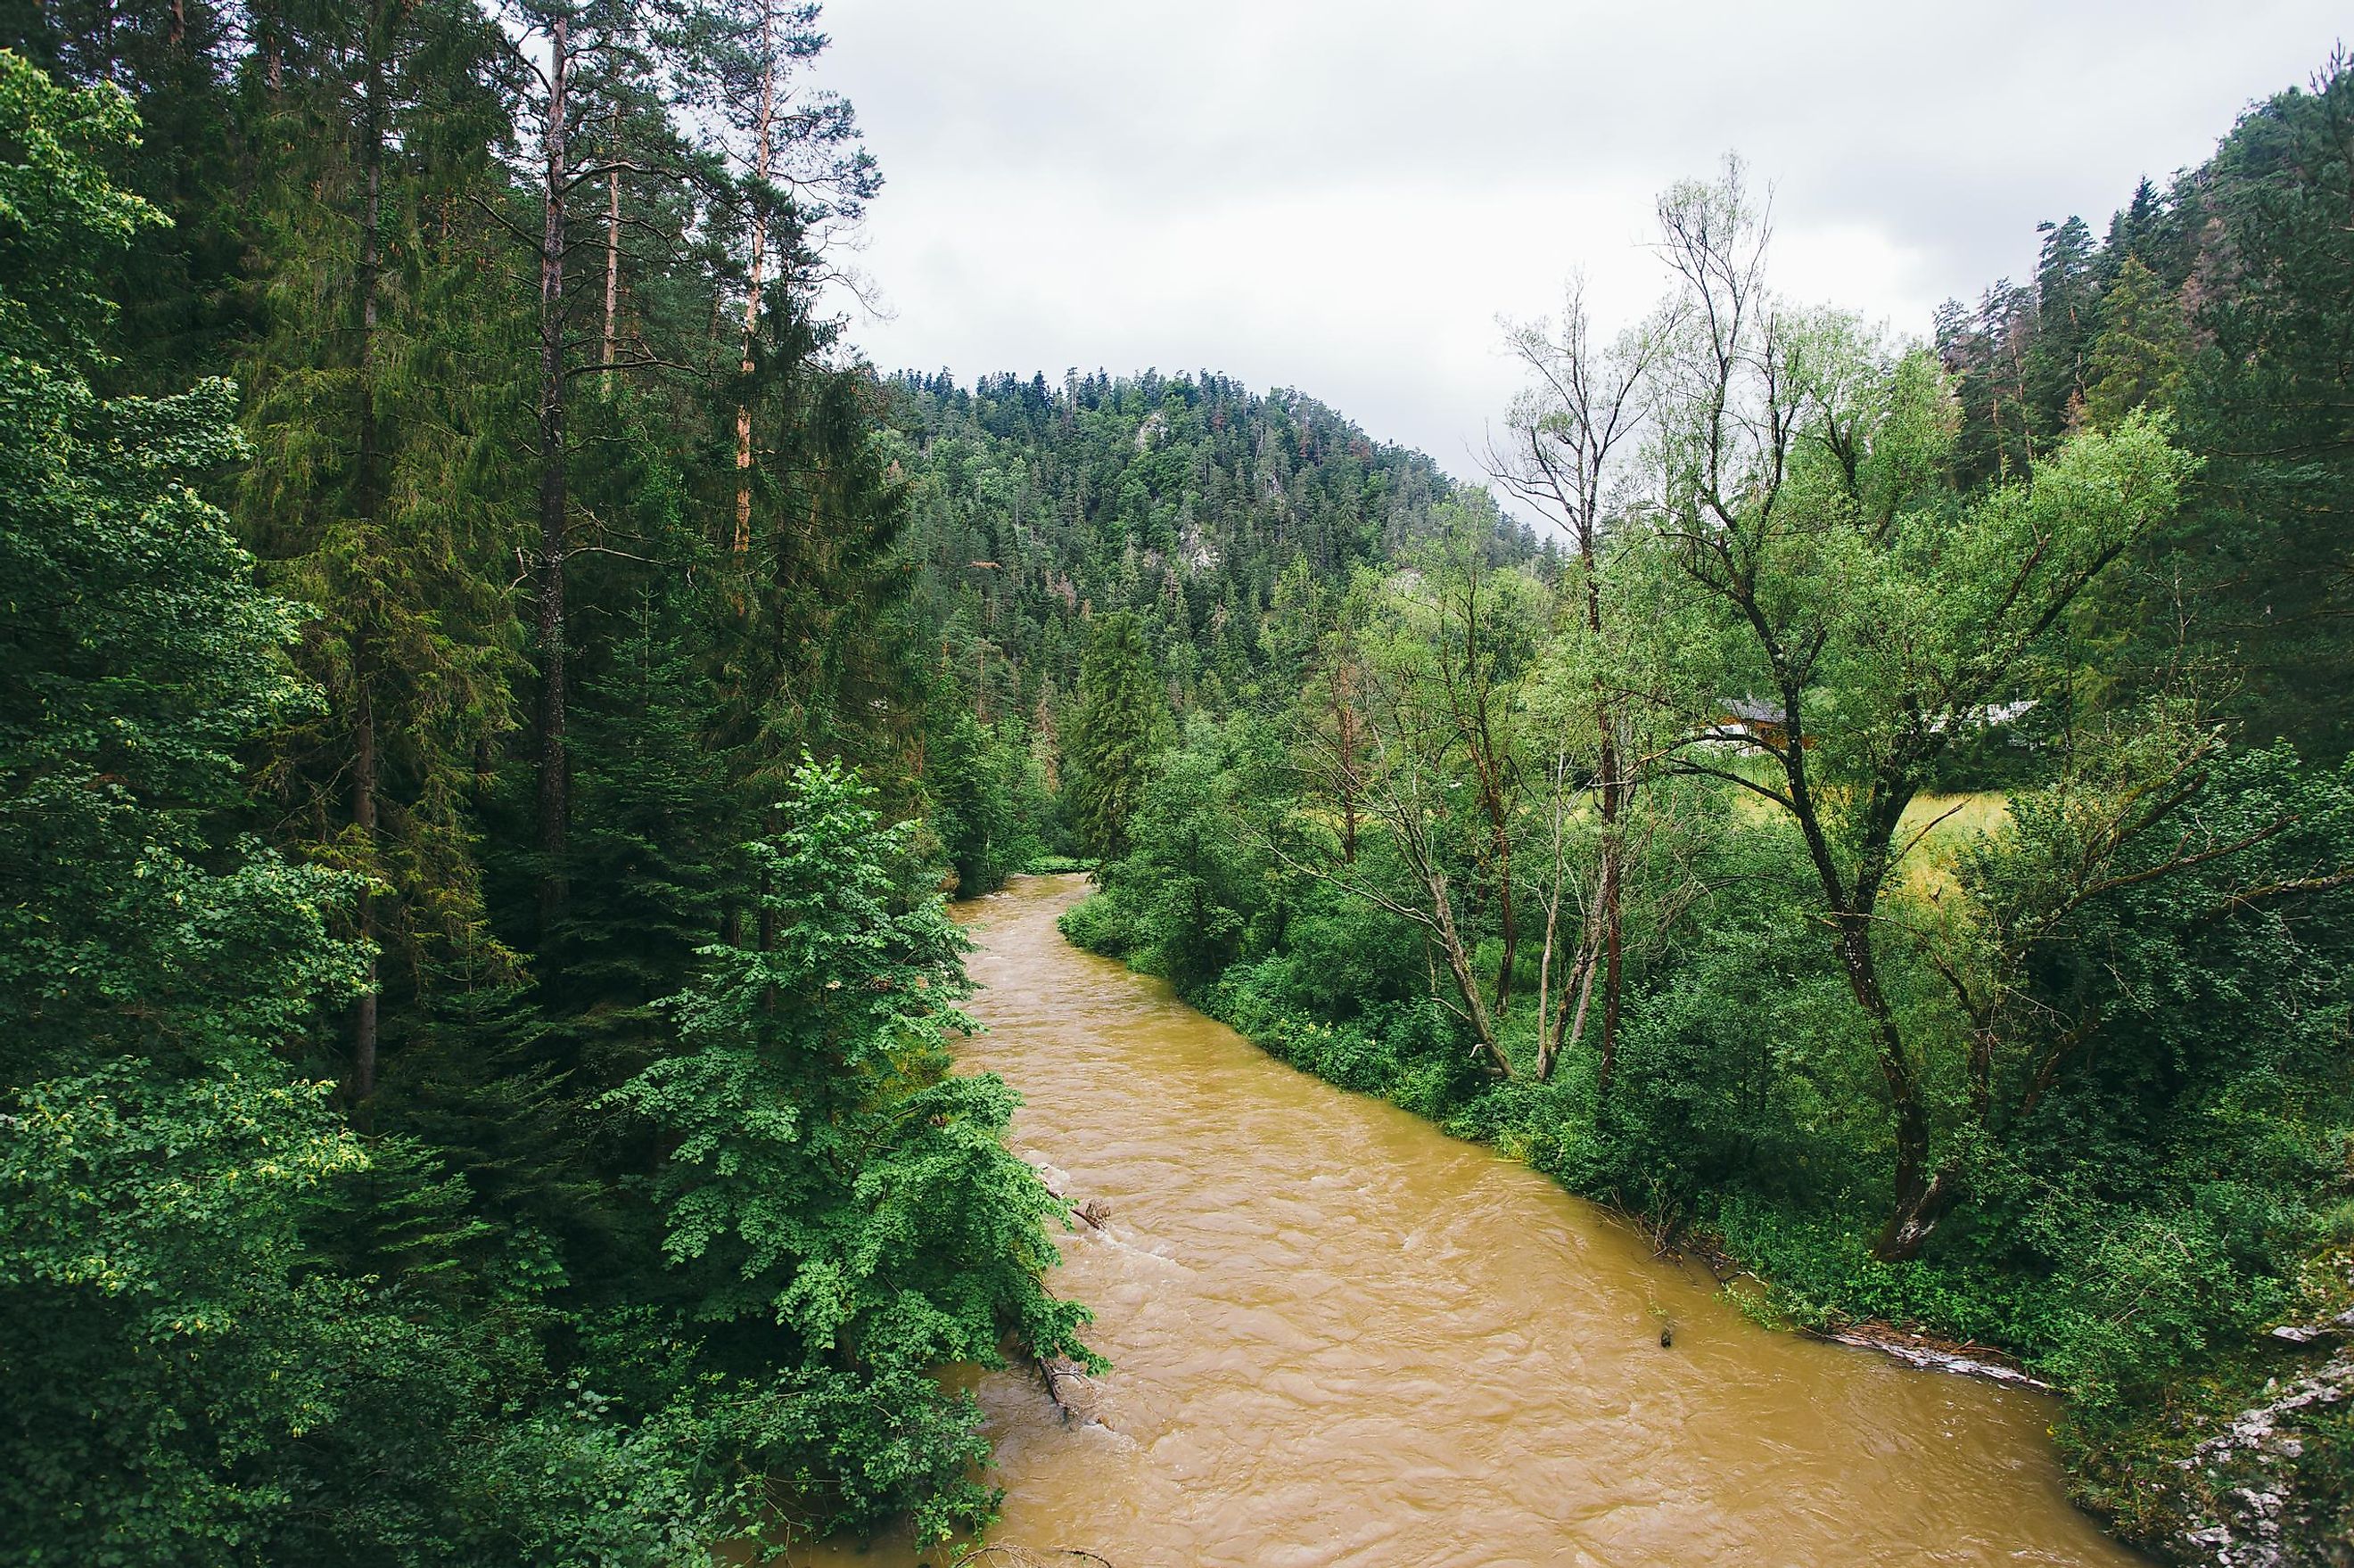 The Hornad River flowing through the forested landscape in Slovakia.